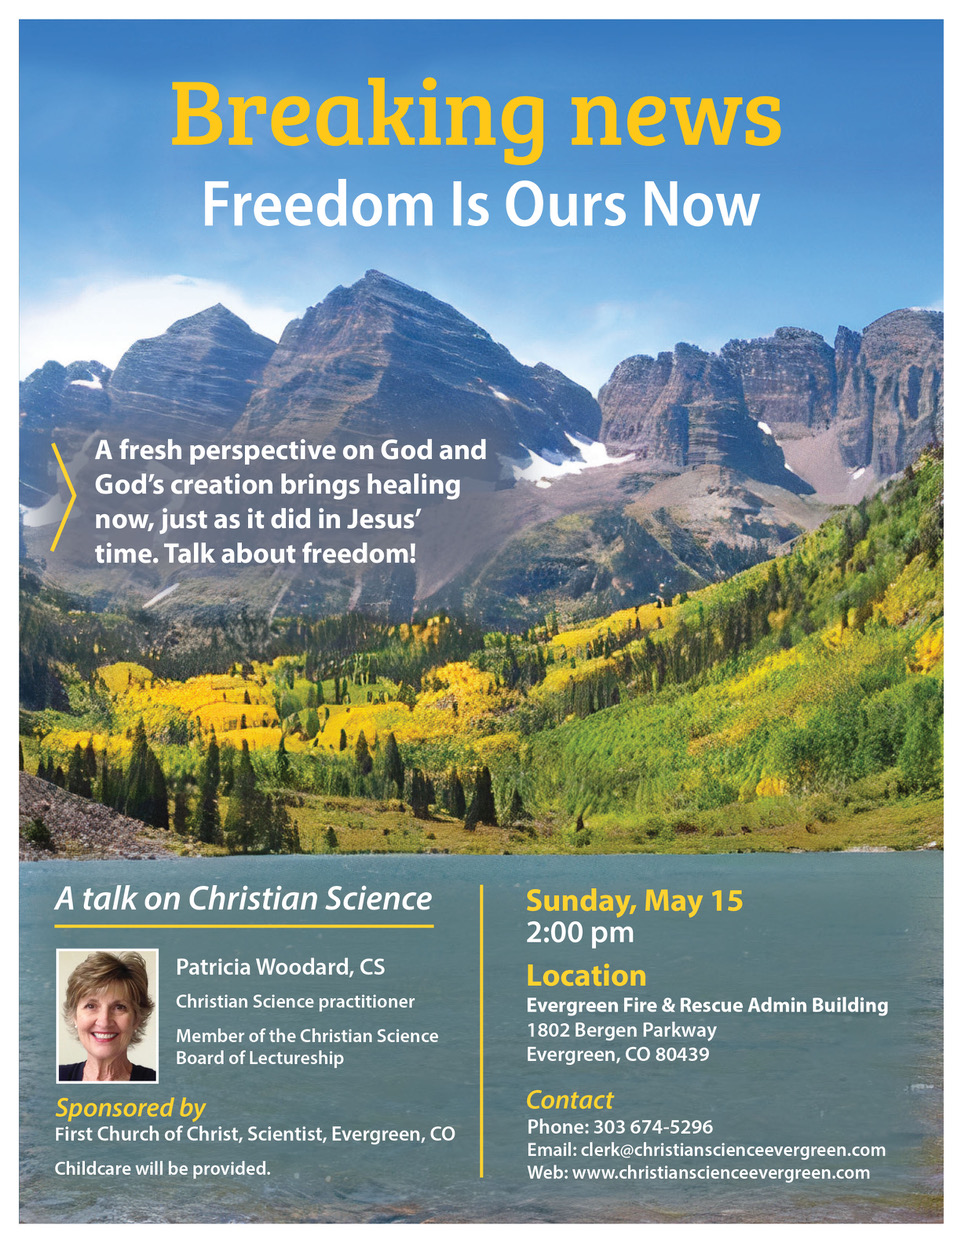 Upcoming Talk on Christian Science